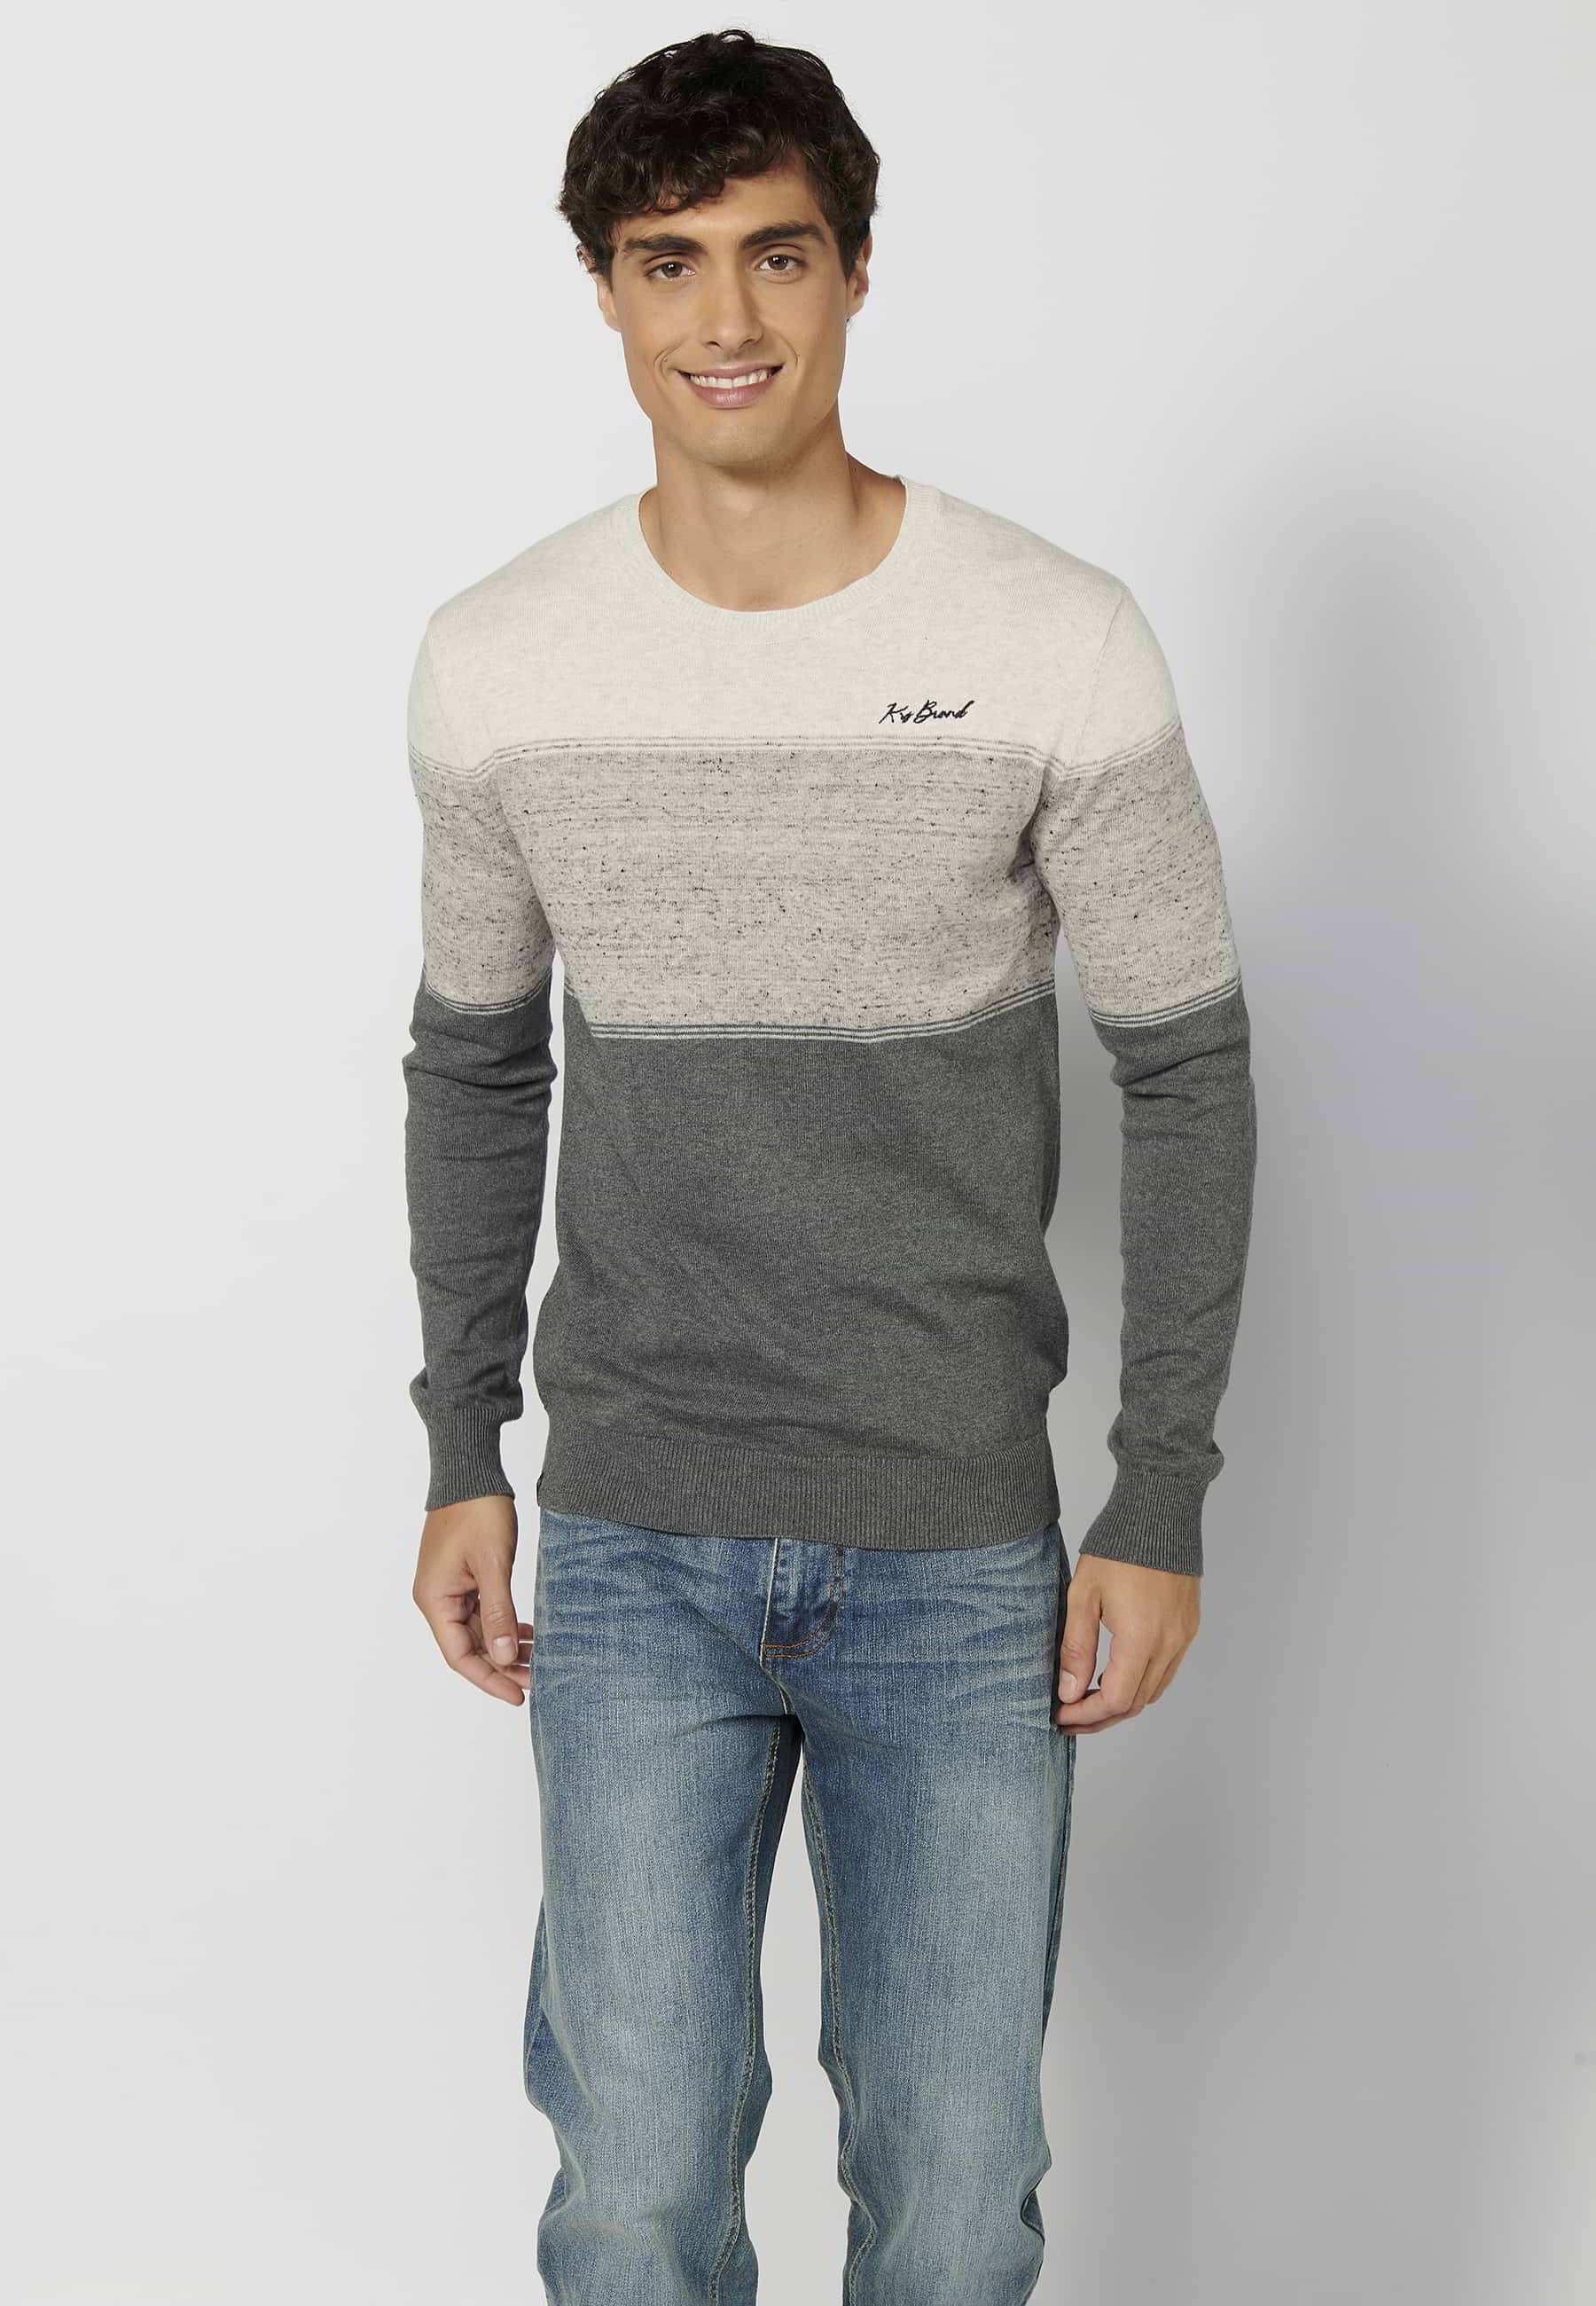 Men's Gray Round Neck Long Sleeve Cotton Knit Sweater